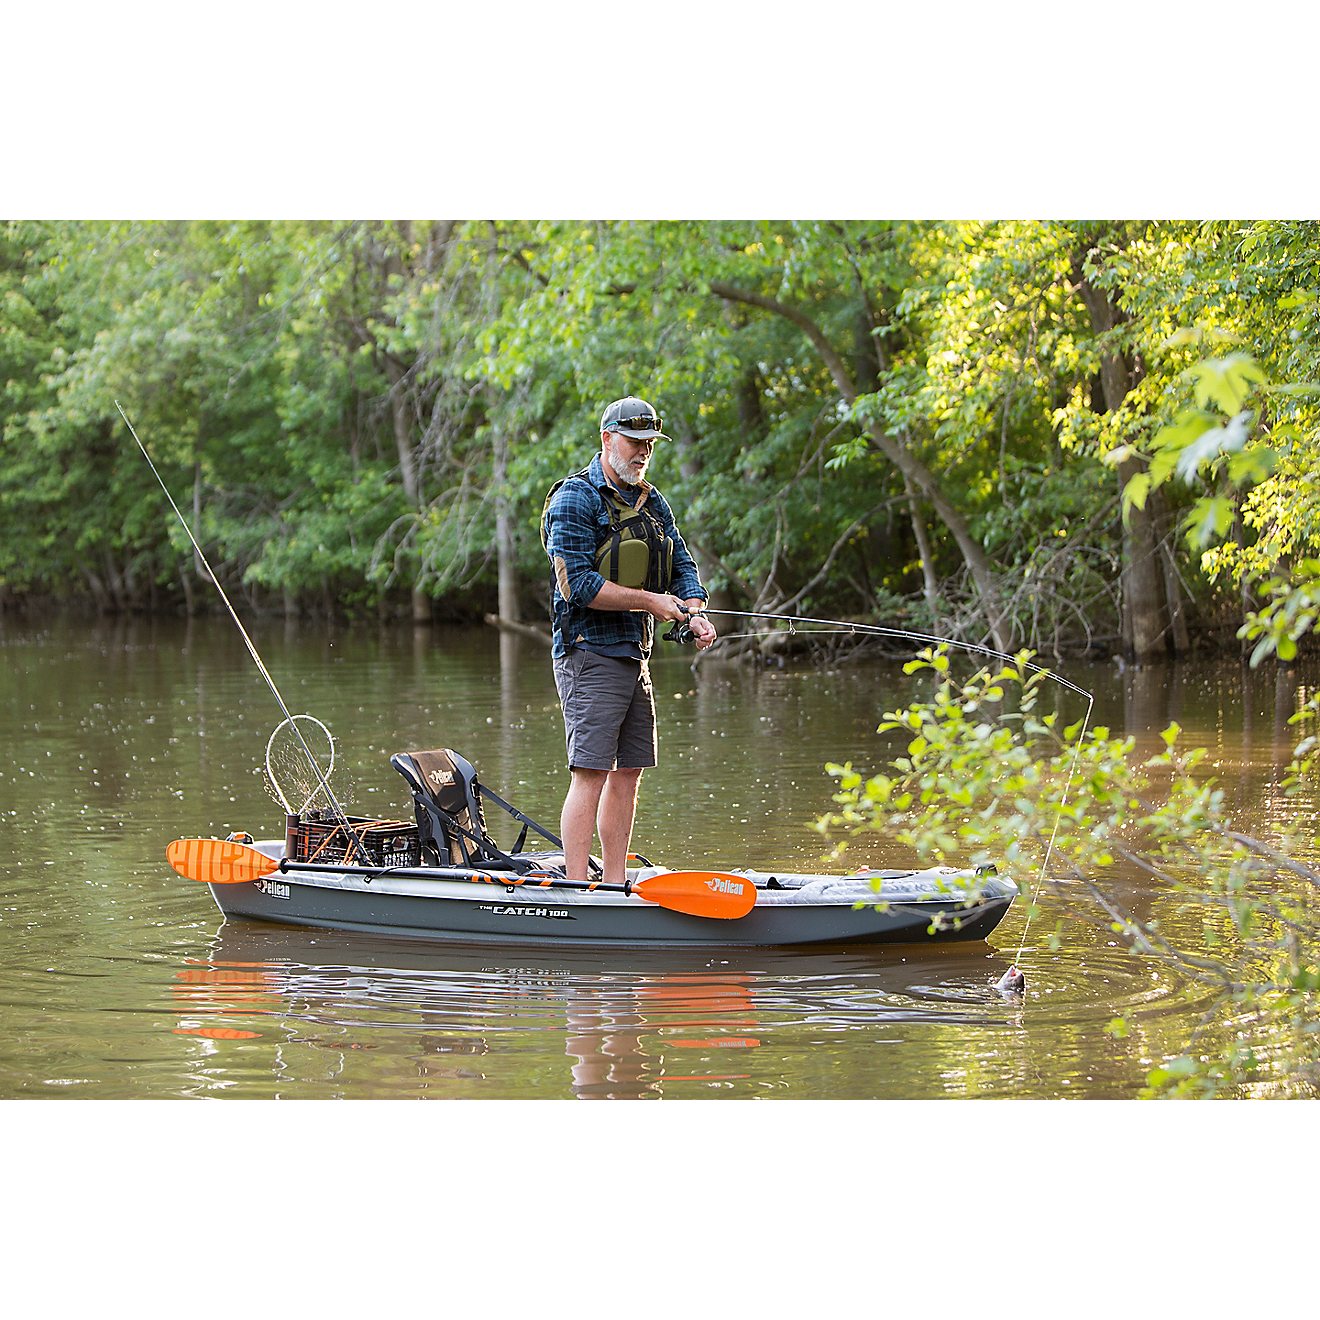 Pelican Premium The Catch 100 10 ft Sit-On-Top Fishing Kayak                                                                     - view number 7